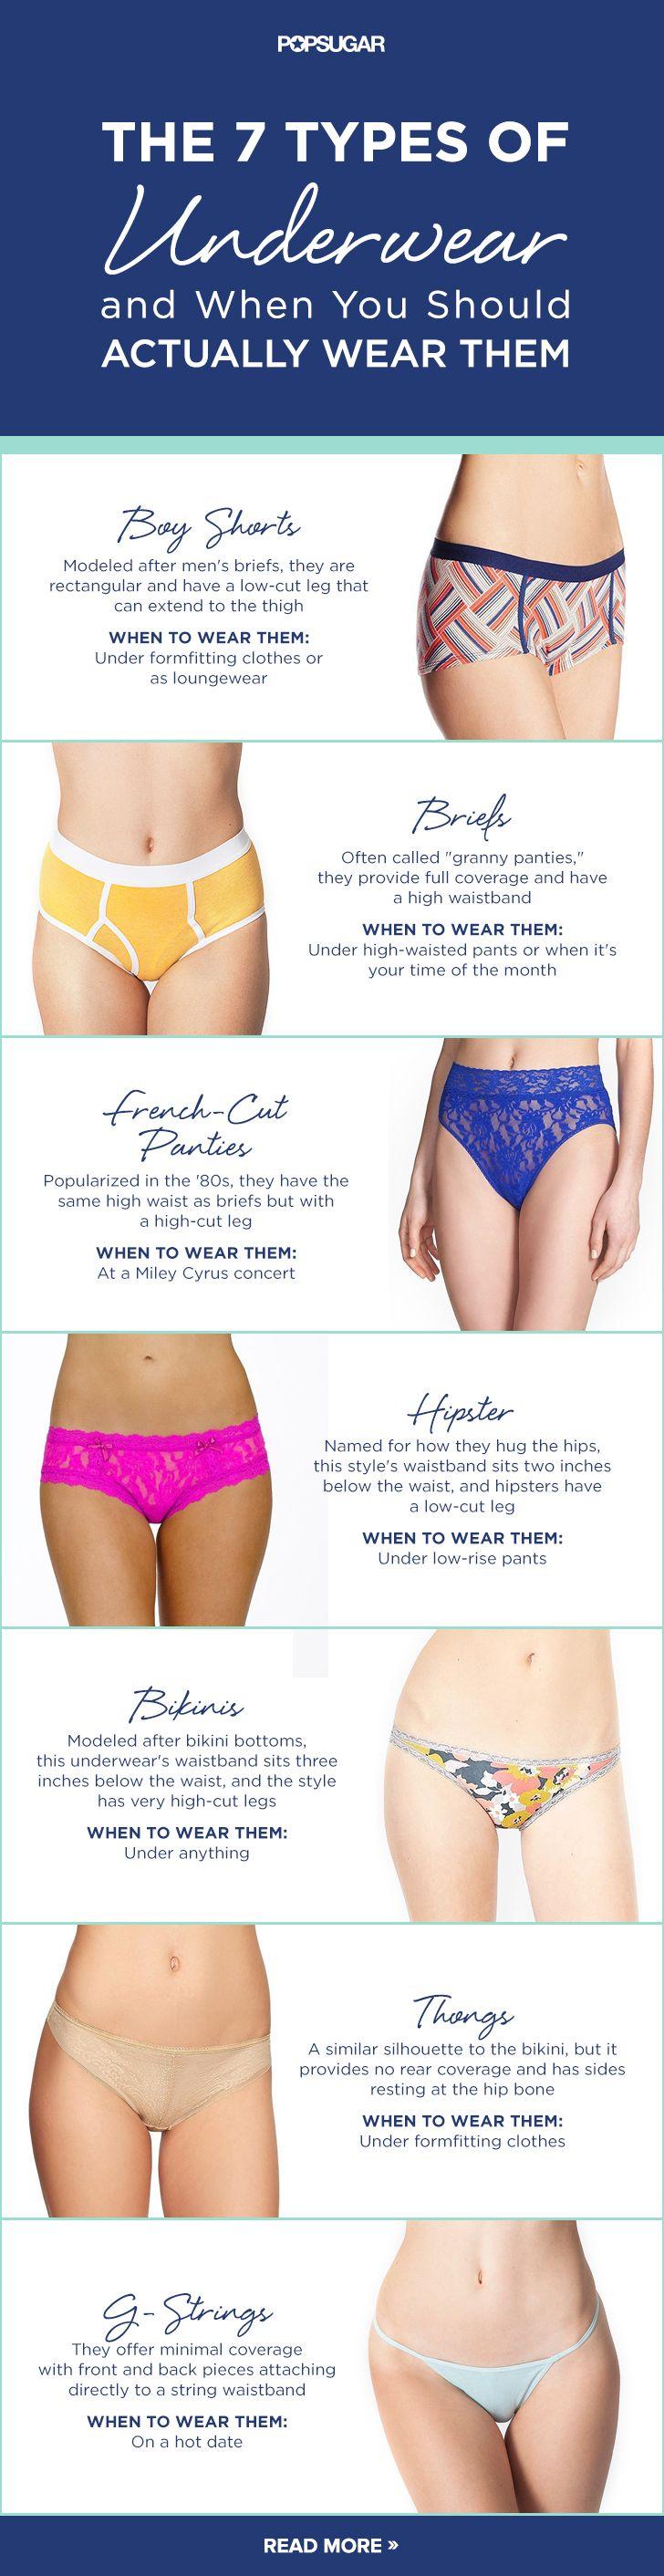 Hochzeit - The 7 Types Of Underwear And When You Should Actually Wear Them